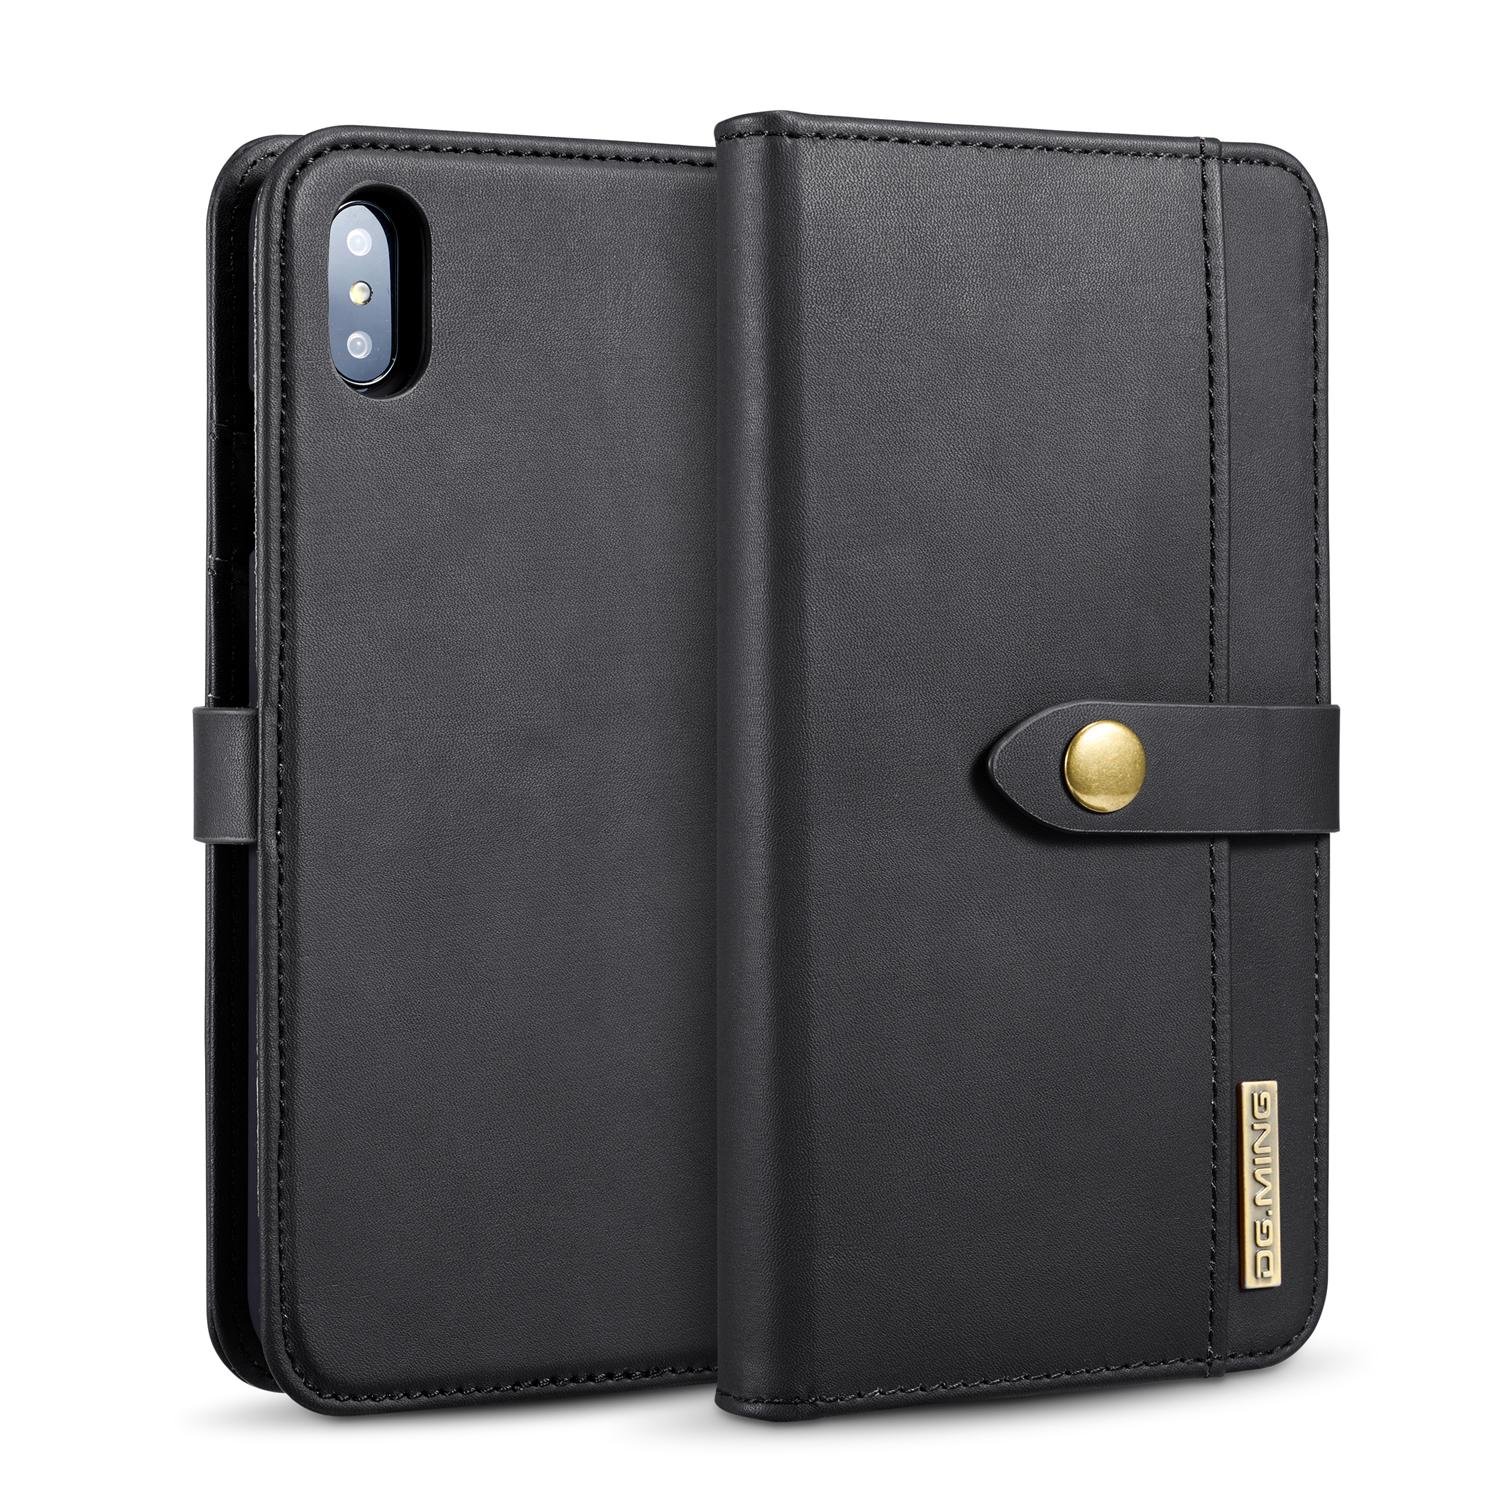 Multwallets smart leather case for iPhone Xs Max Lambskin cover 5